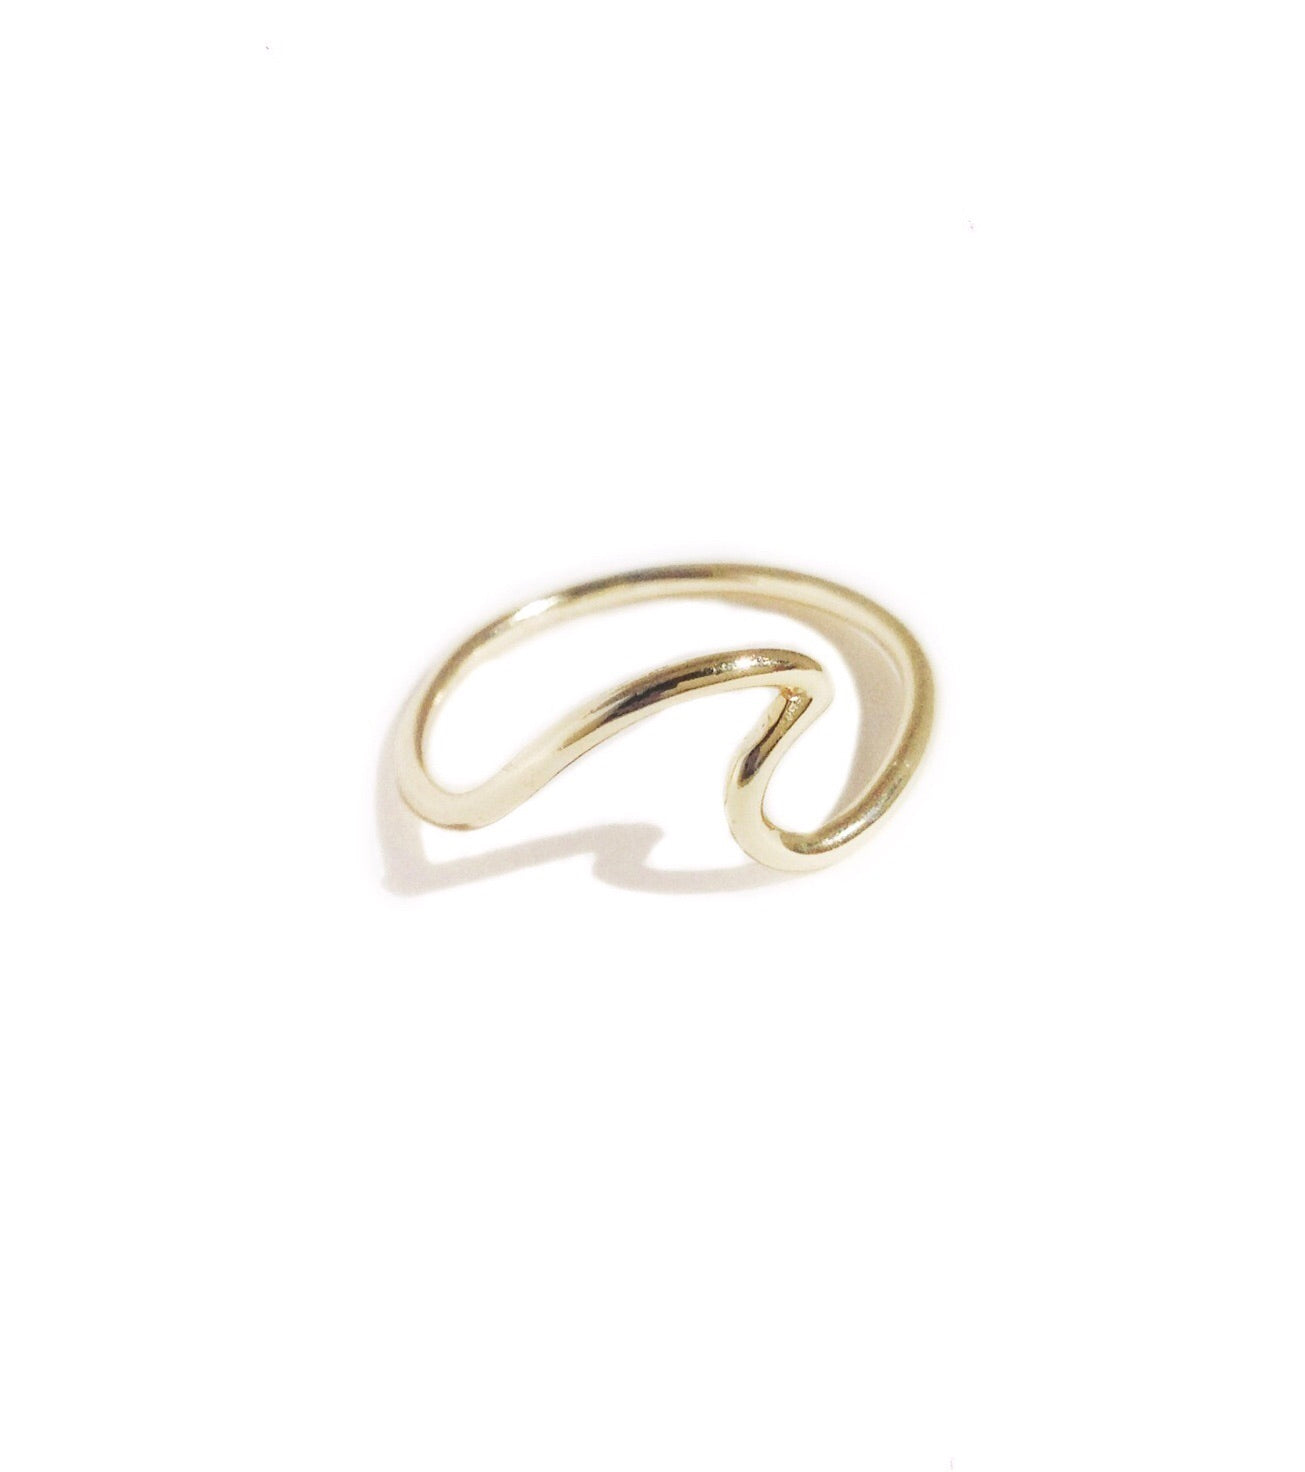 WAVE RING SILVER GOLD PLATED